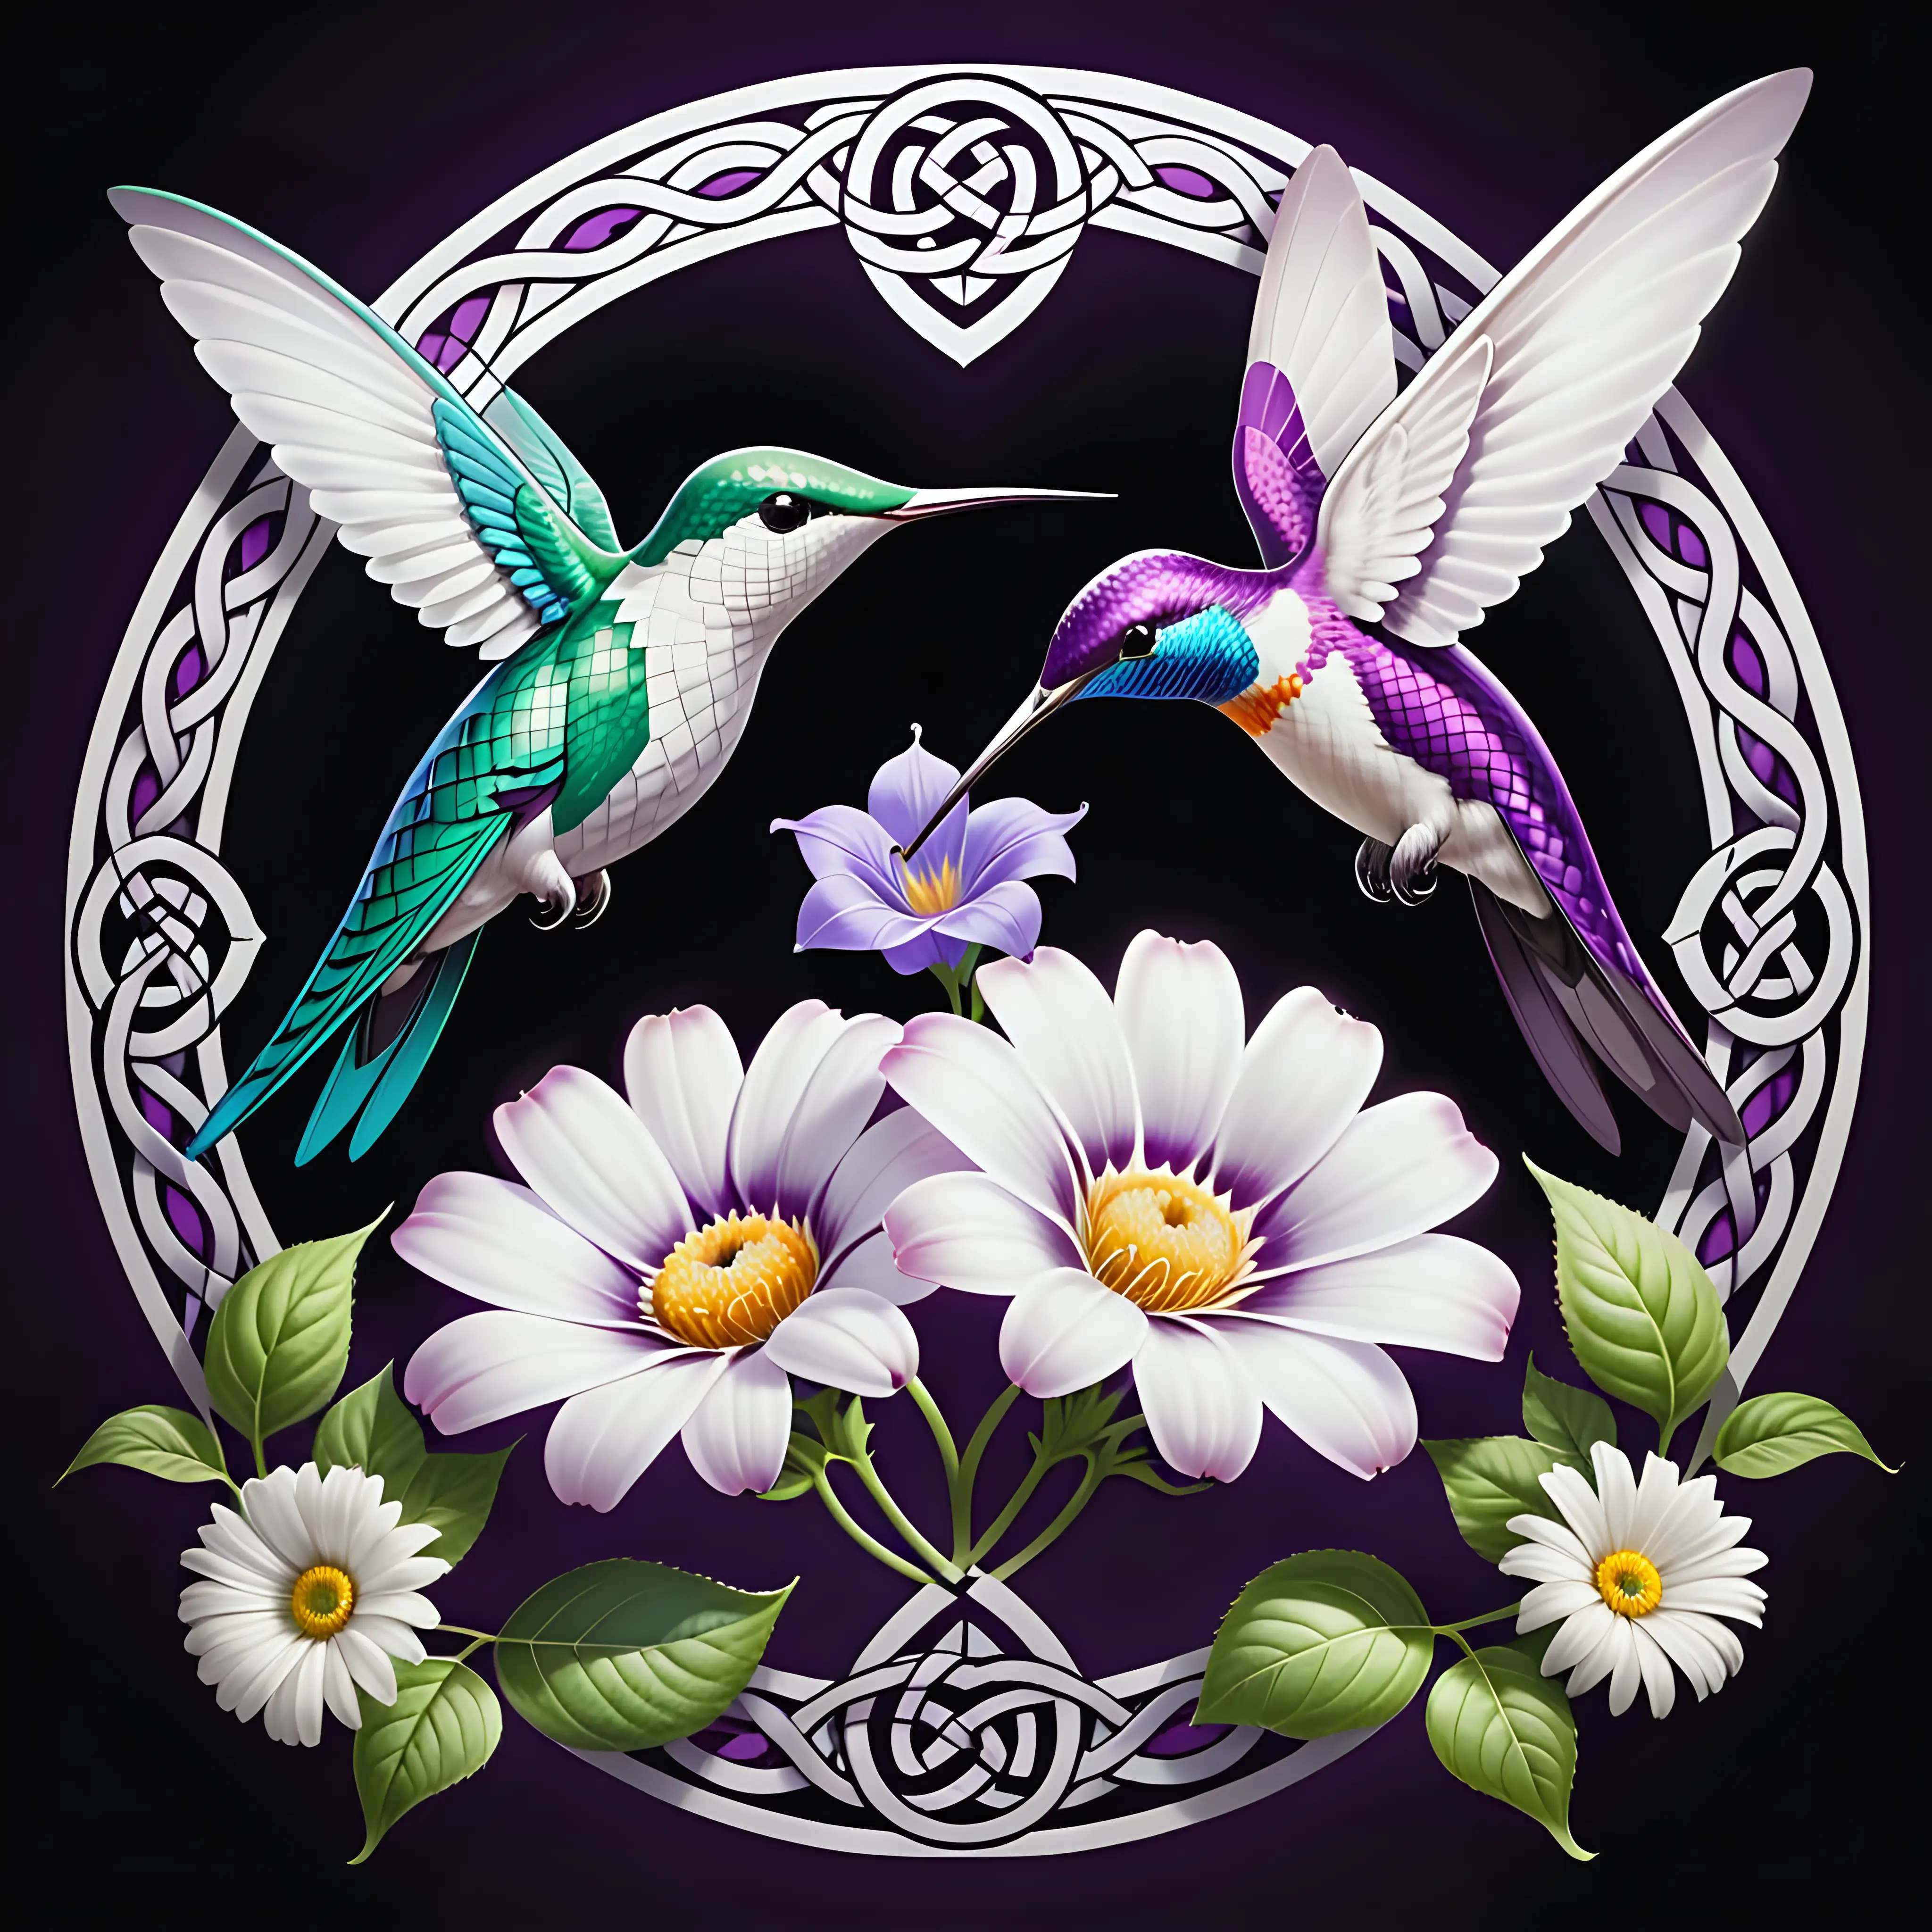 graphic celtic knot, twisted beauty, pure white daisies, purple morning glories, two hummingbird,
 tattoo style